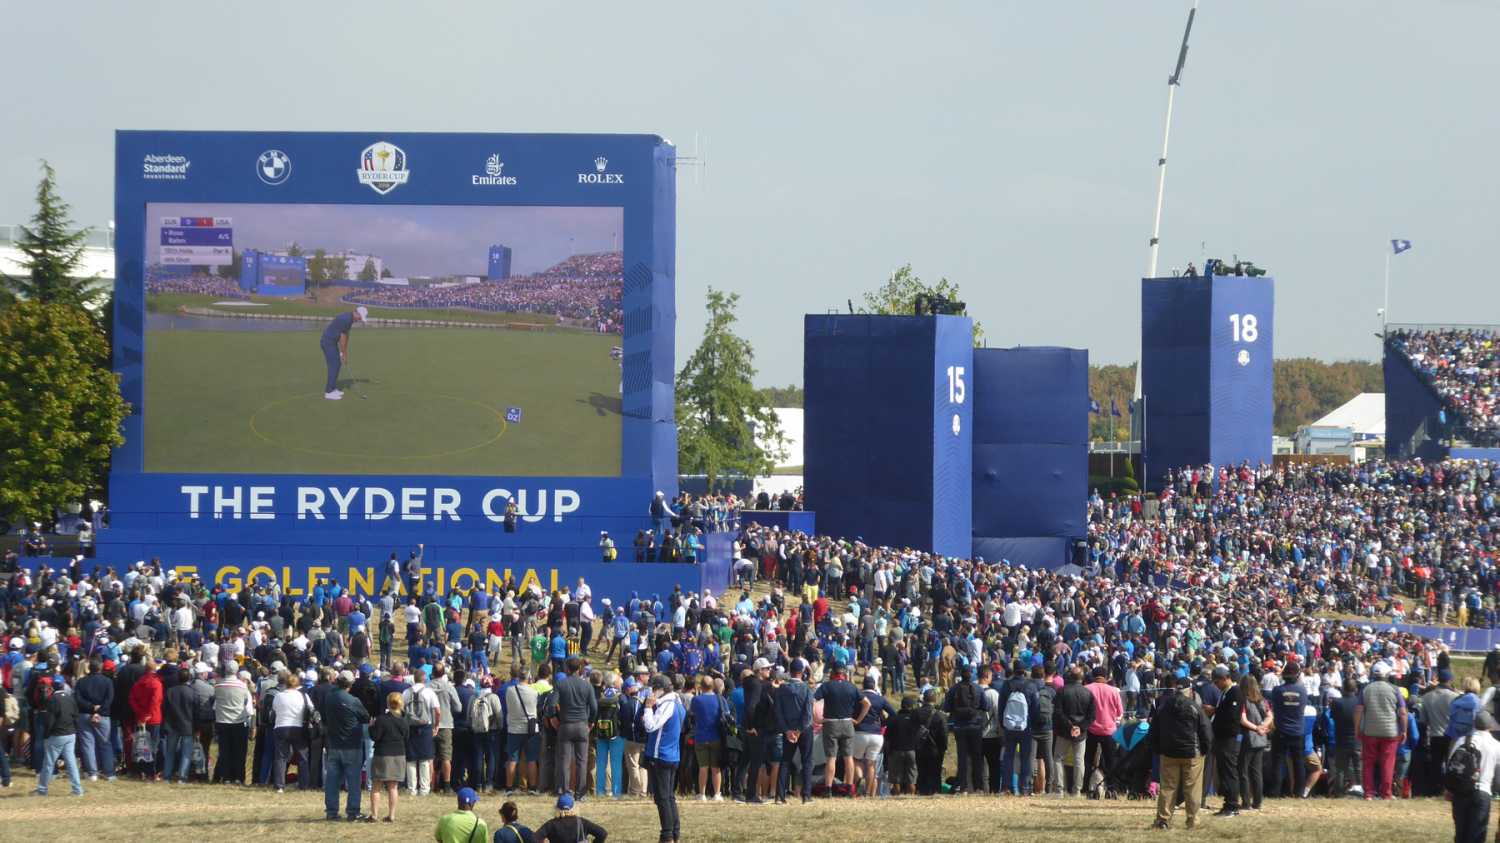 The European Tour includes the Ryder Cup on its four-yearly visit to Europe